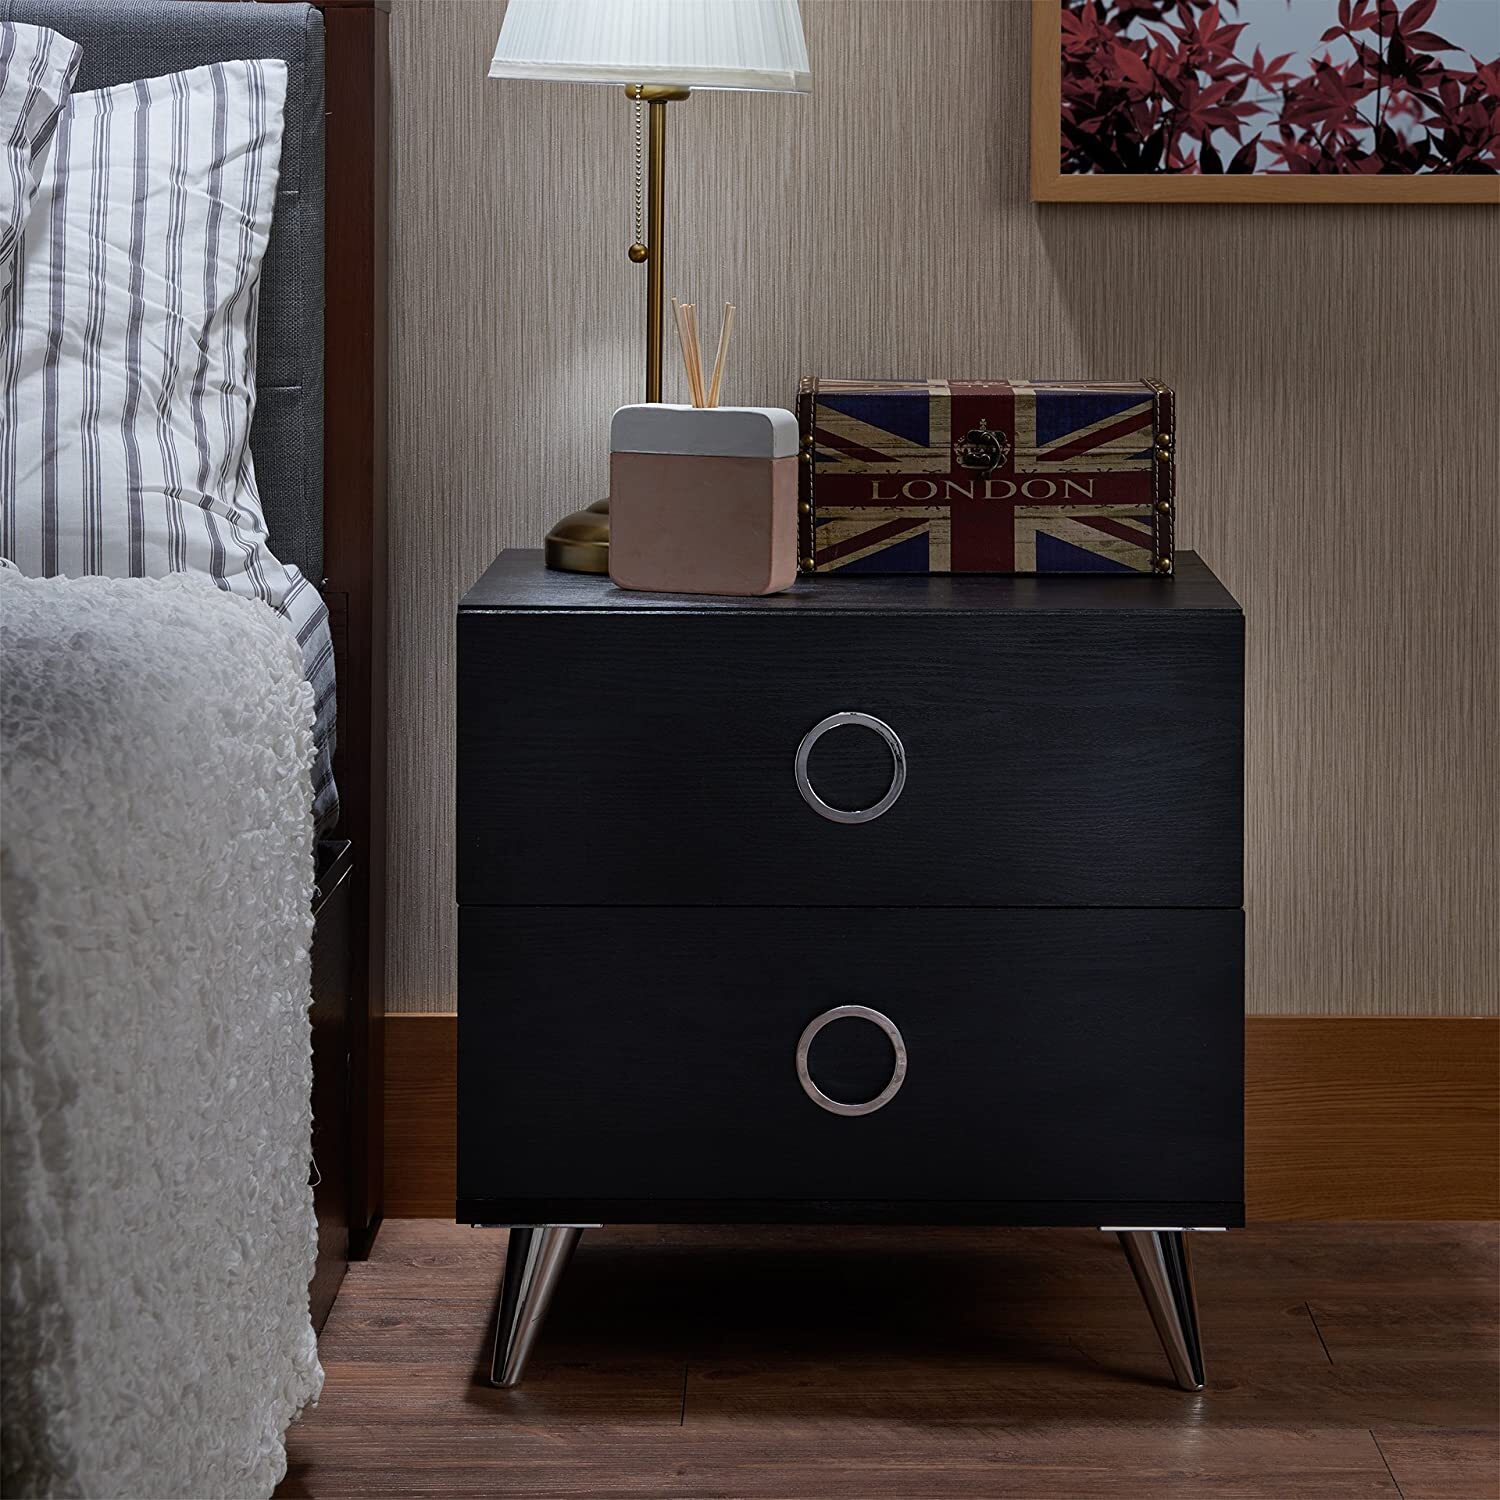 19.69" X 16.61" X 19.76" Black Particle Board Nightstand